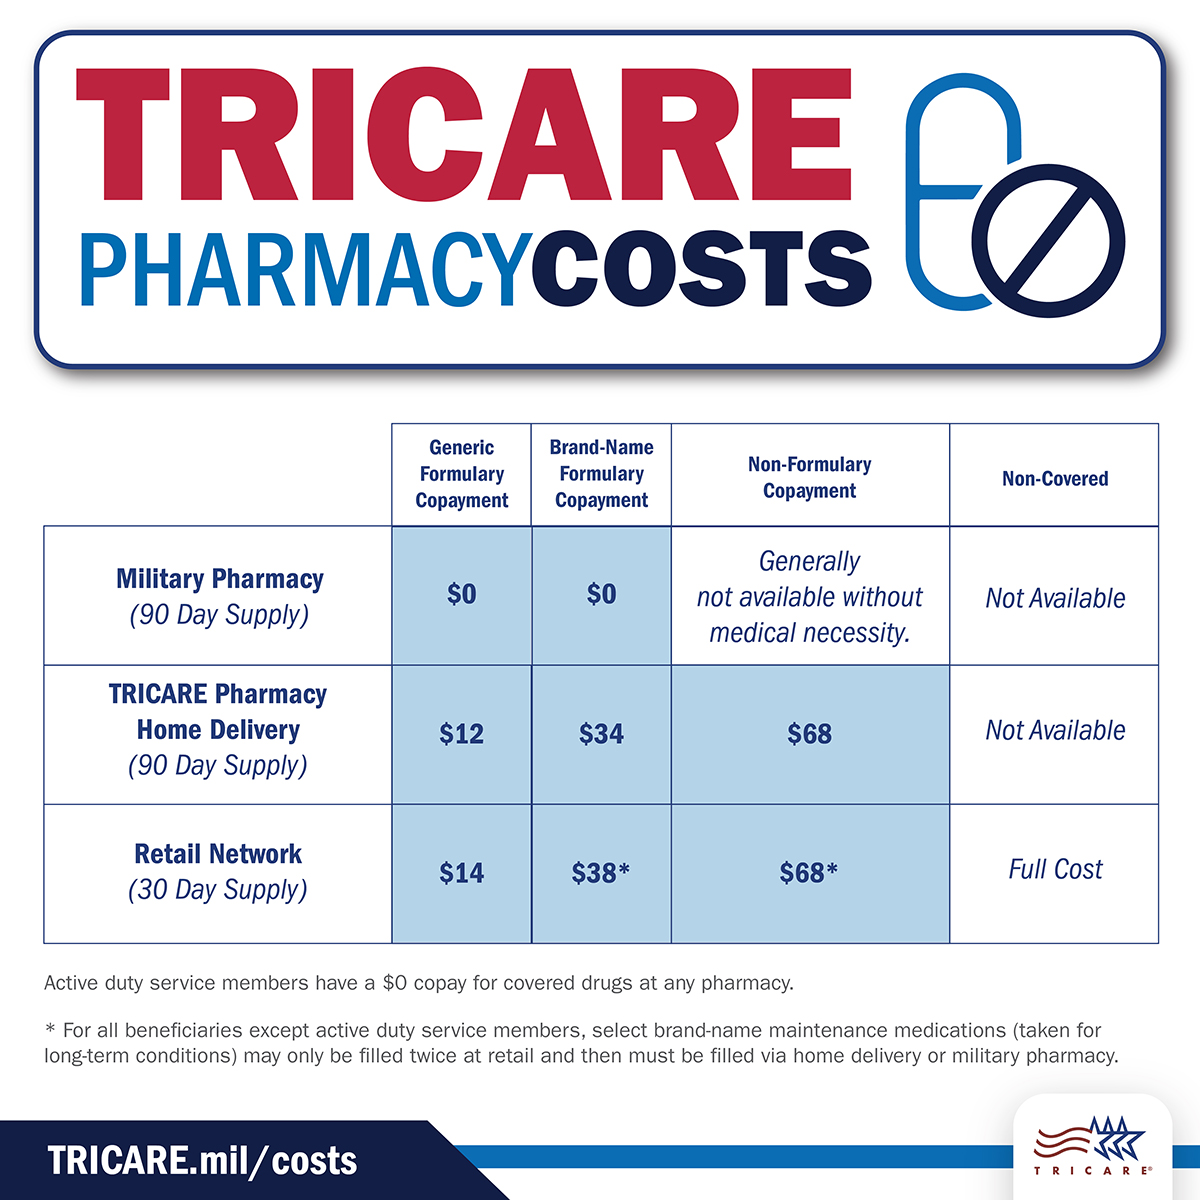 TRICARE Pharmacy Costs